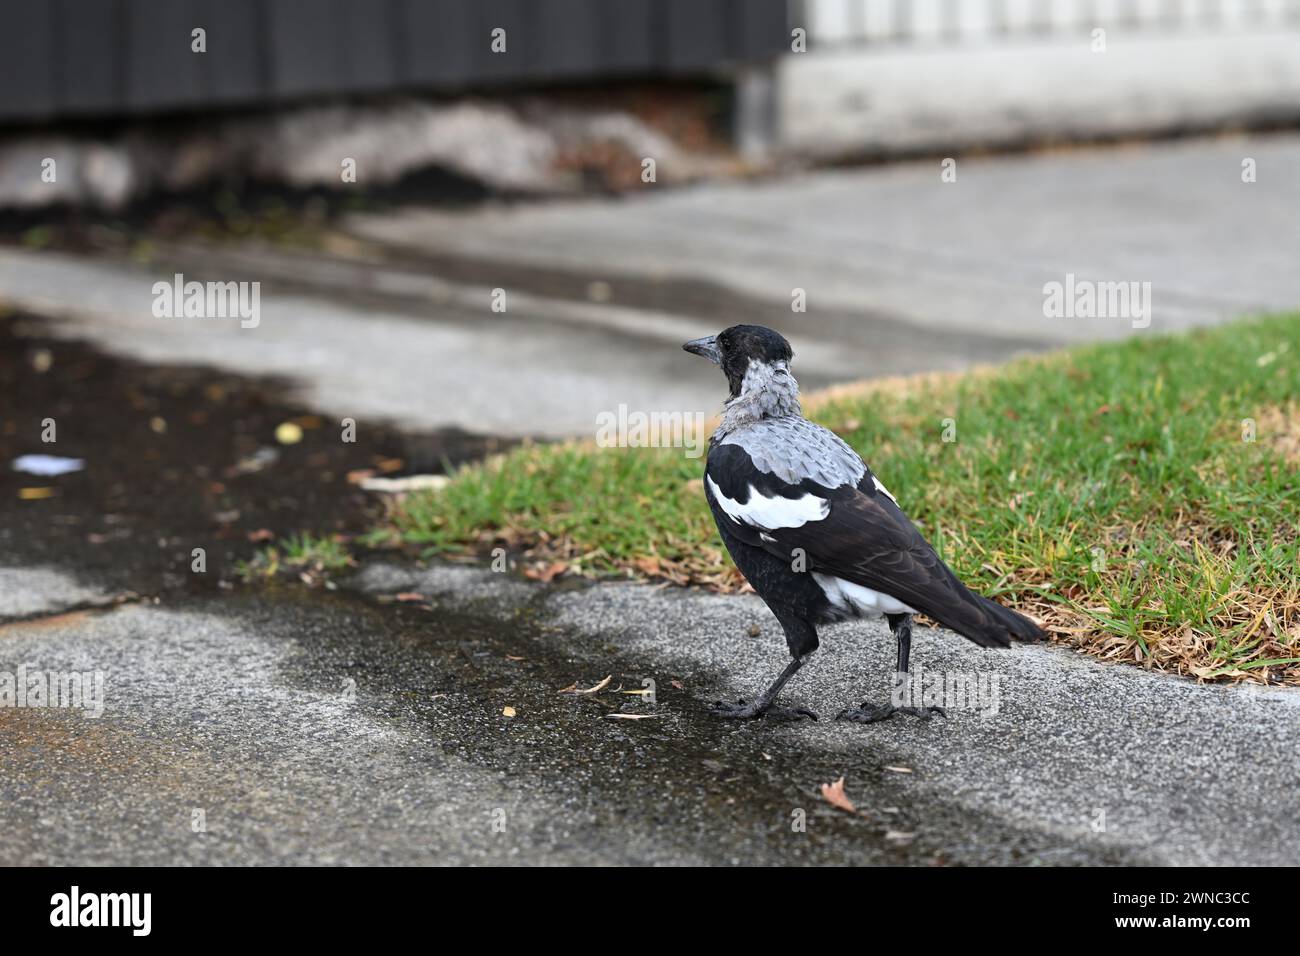 Rear view of a juvenile Australian magpie, as the bird looks at a small stream of water running along pavement Stock Photo